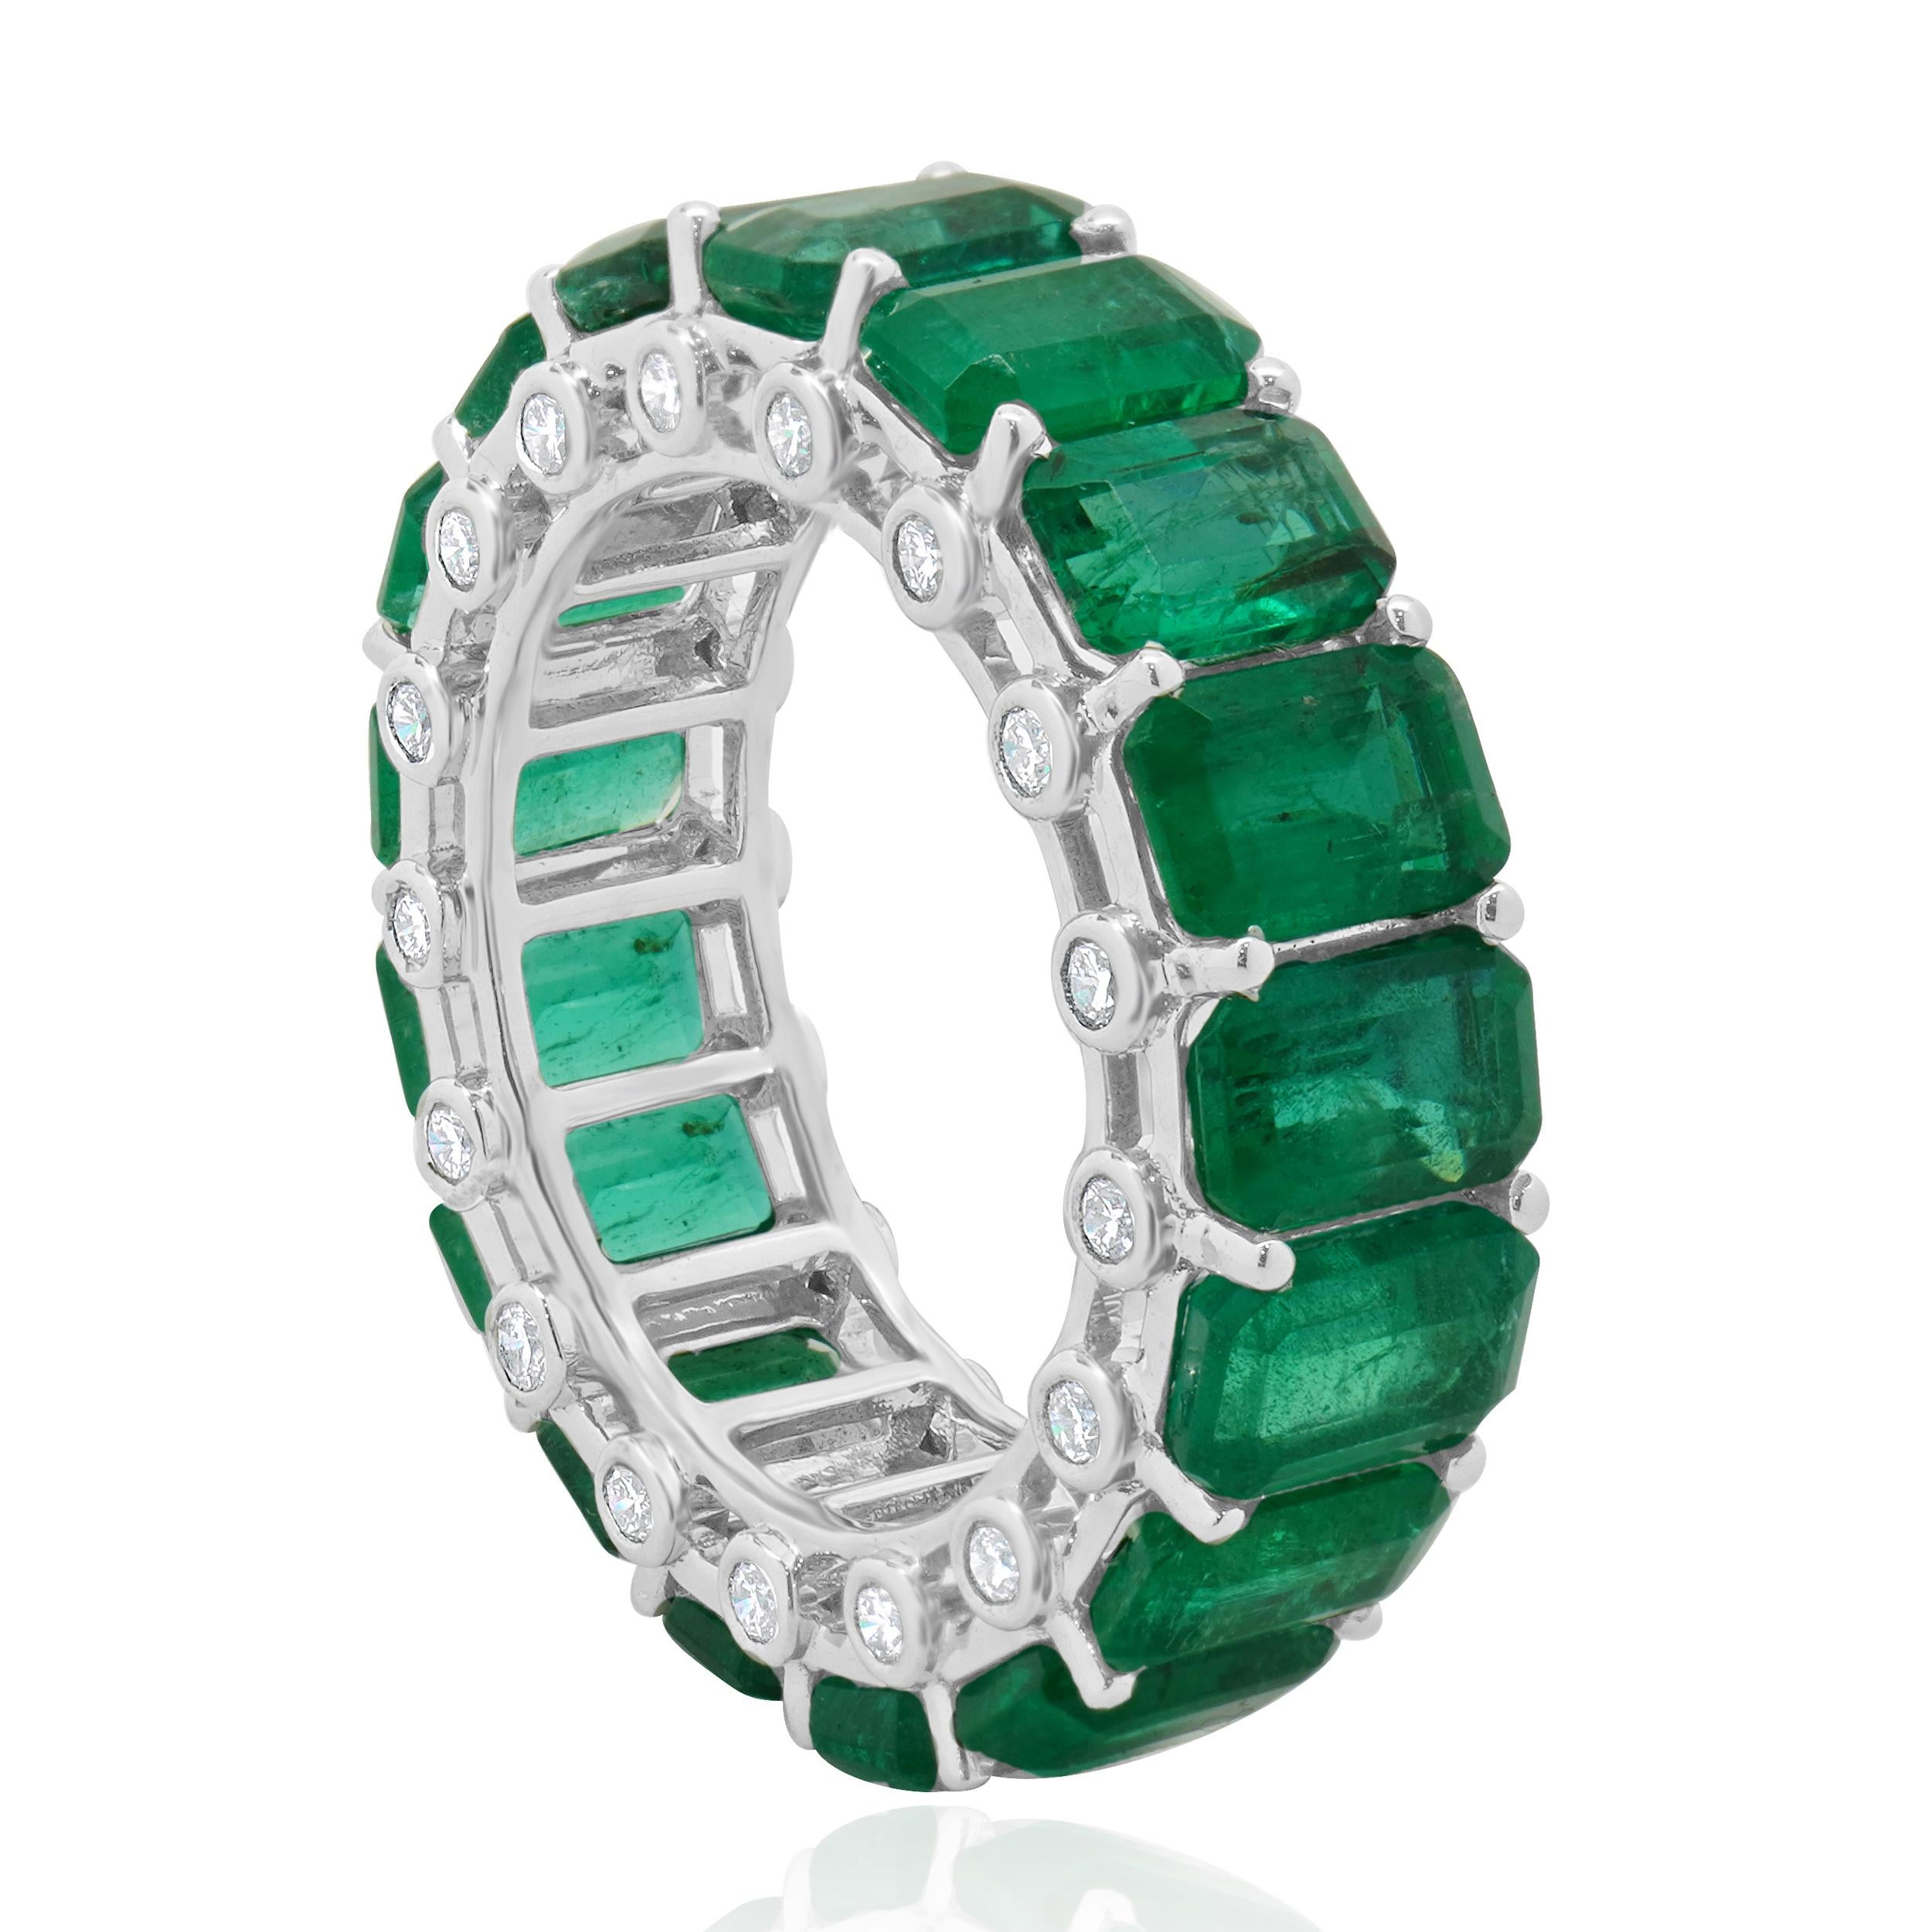 Designer: custom
Material: 14K white gold
Diamond:  34 round brilliant cut = 0.51cttw
Color: G	
Clarity: VS-SI1
Emerald: 17 emerald cut = 9.72cttw
Ring size: 6 (please allow two additional shipping days for sizing requests)
Weight: 5.53 grams
